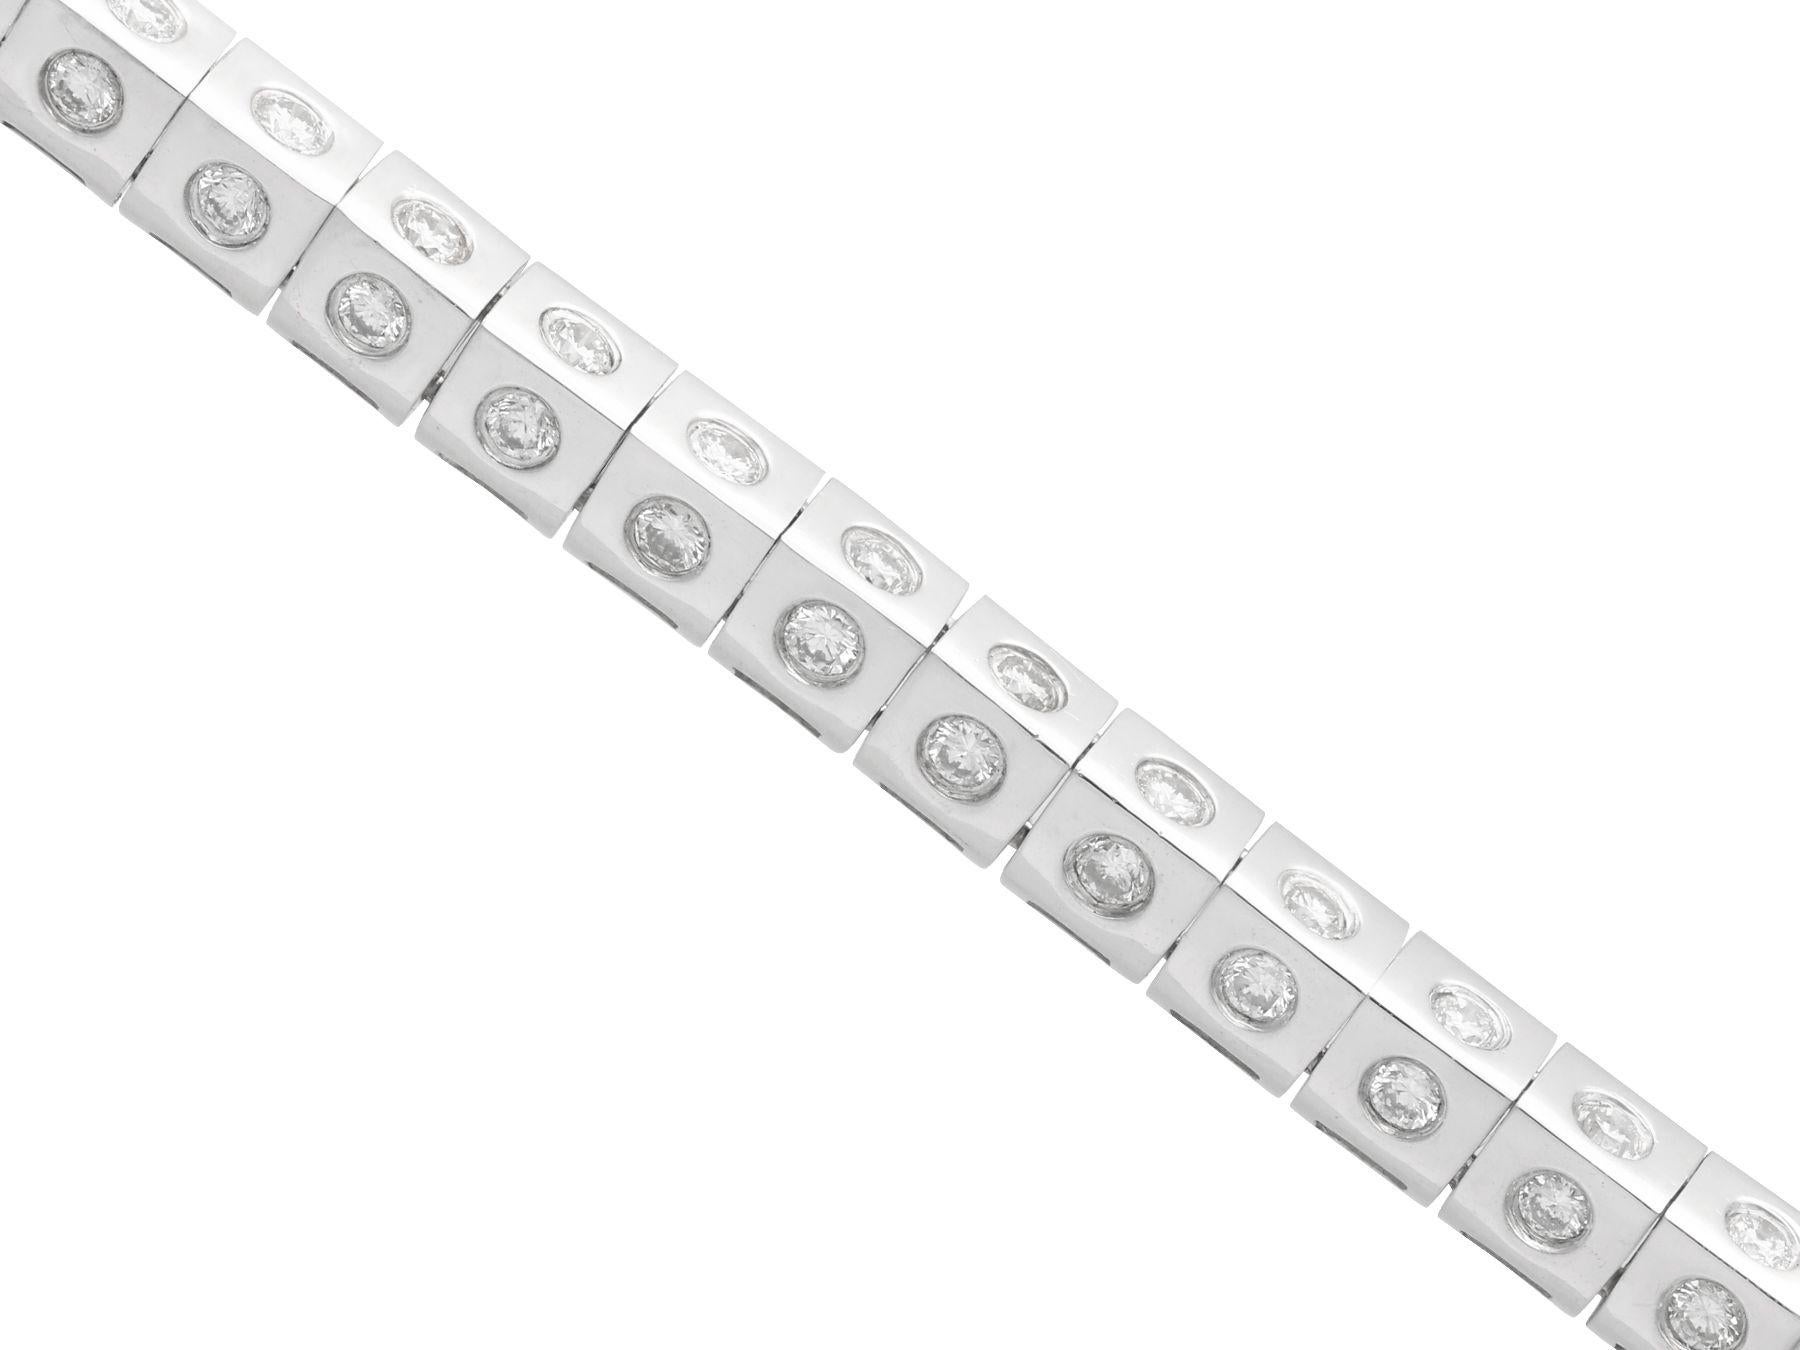 A fine and impressive vintage 2.10 carat diamond and 18 carat white gold bracelet; part of our diverse diamond jewellery and estate jewelry collections

This fine and impressive vintage diamond bracelet has been crafted in 18ct white gold.

This